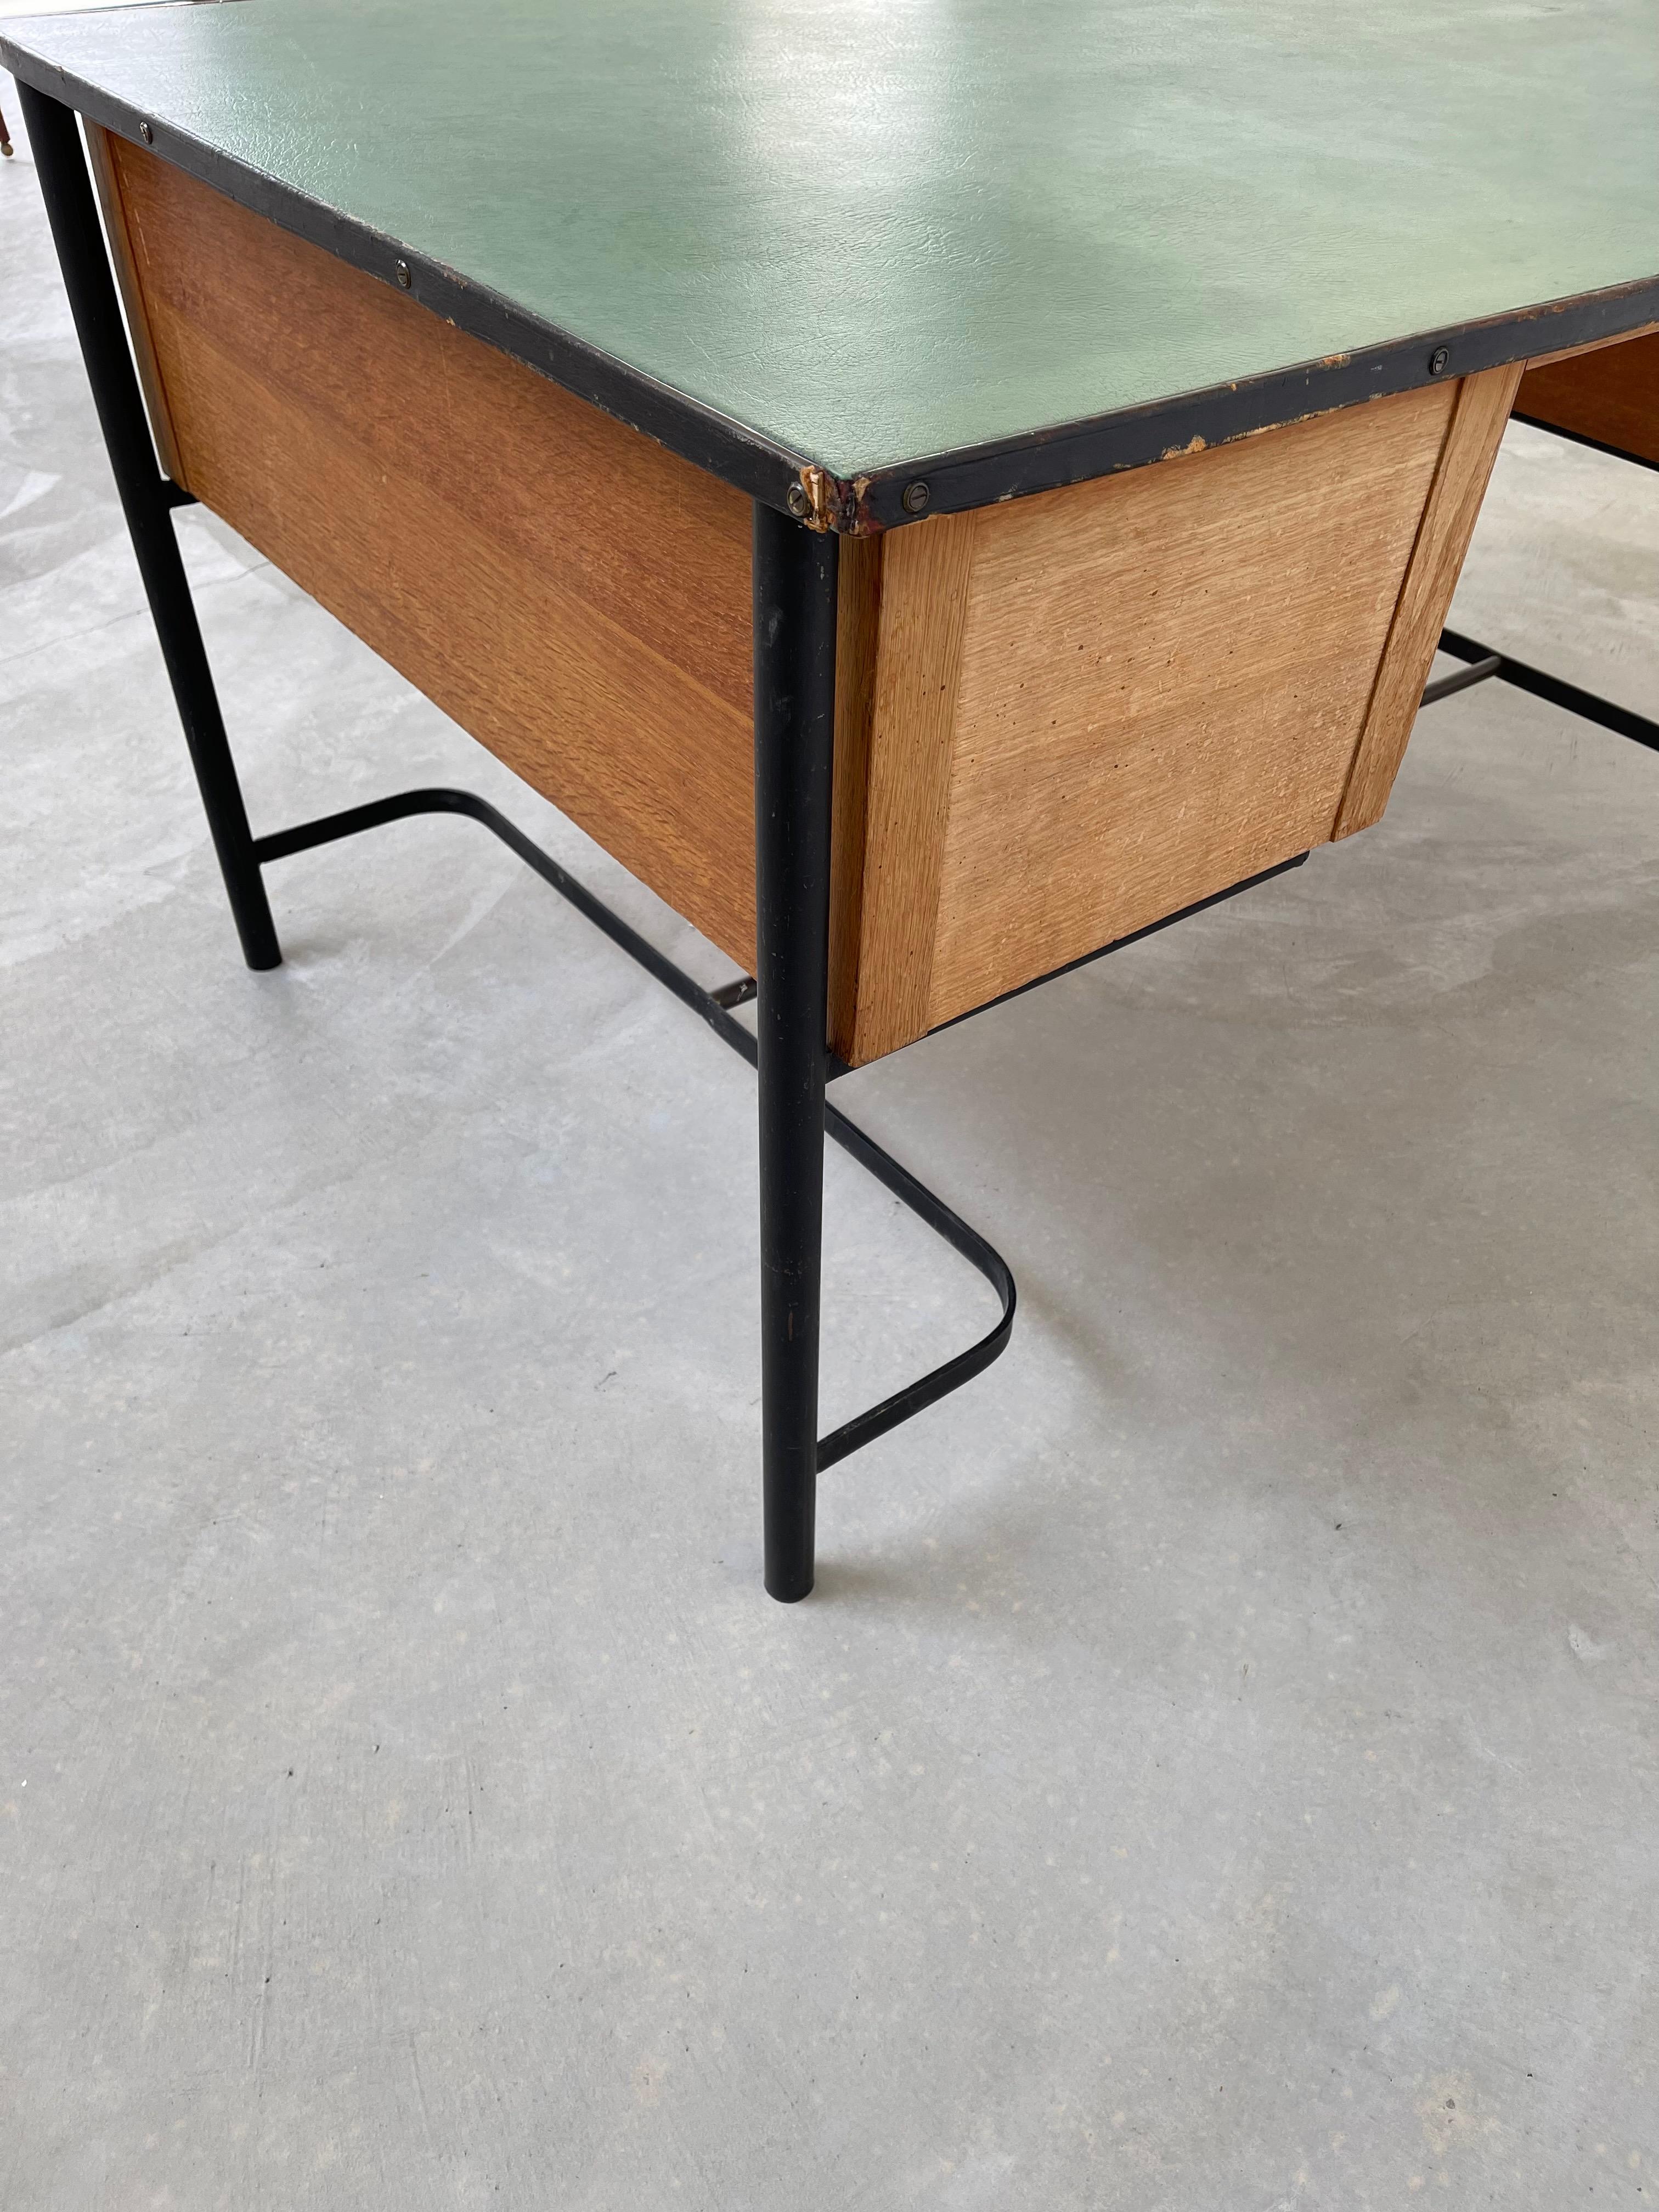 Jacques Adnet Leather and Oak Desk, 1950s France For Sale 4